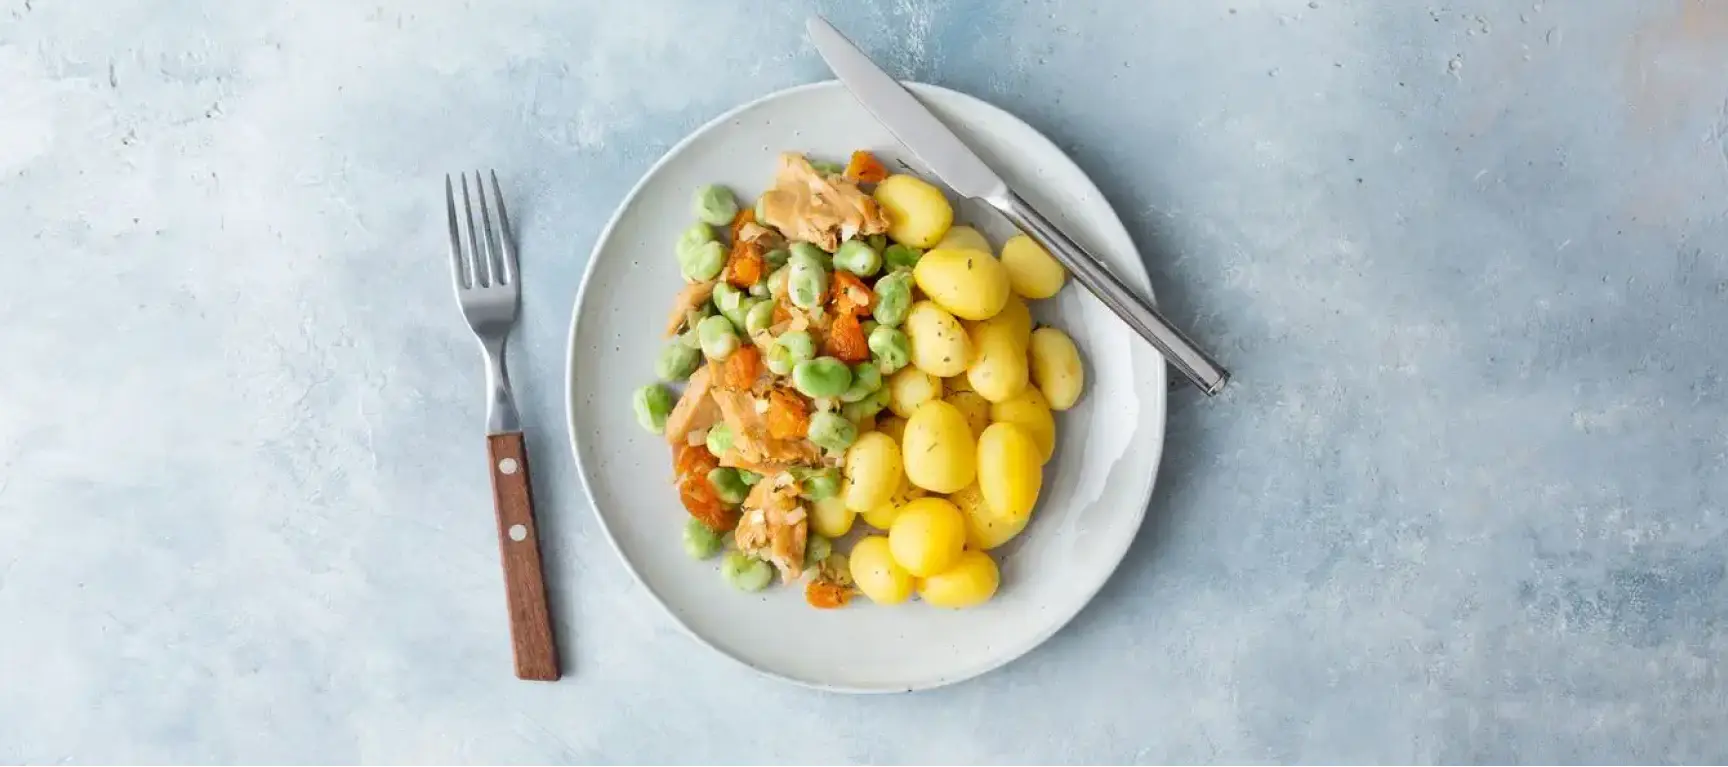 Broad beans with vegetable chicken pieces, baby potatoes and apricots